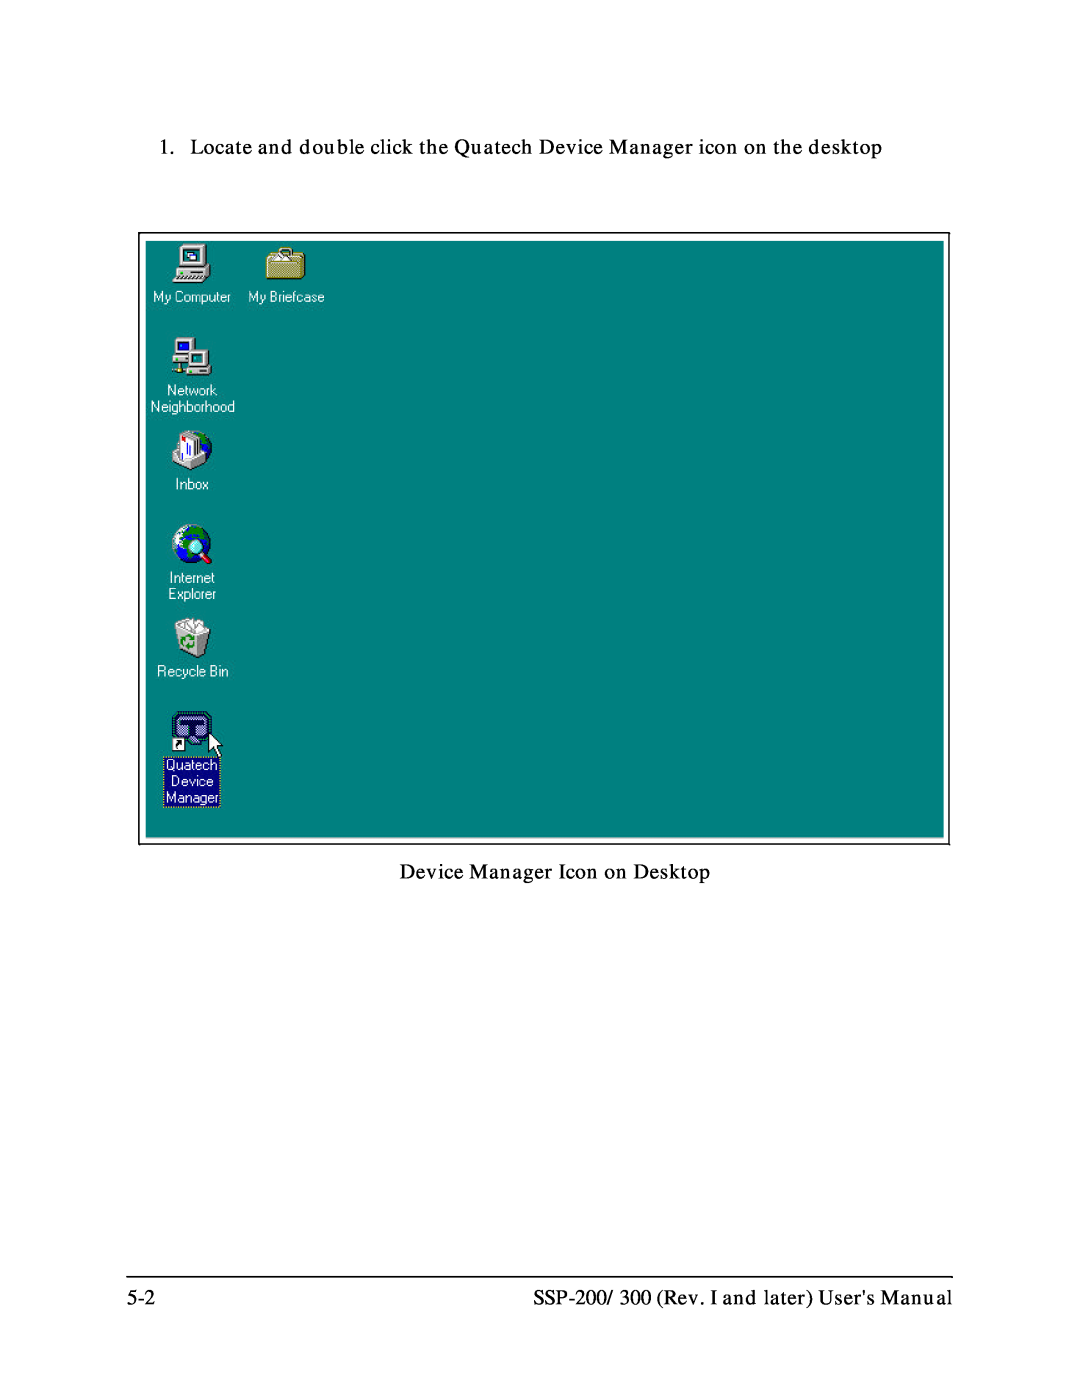 Quatech SSP-300 user manual Device Manager Icon on Desktop, SSP-200/300 Rev. I and later Users Manual 